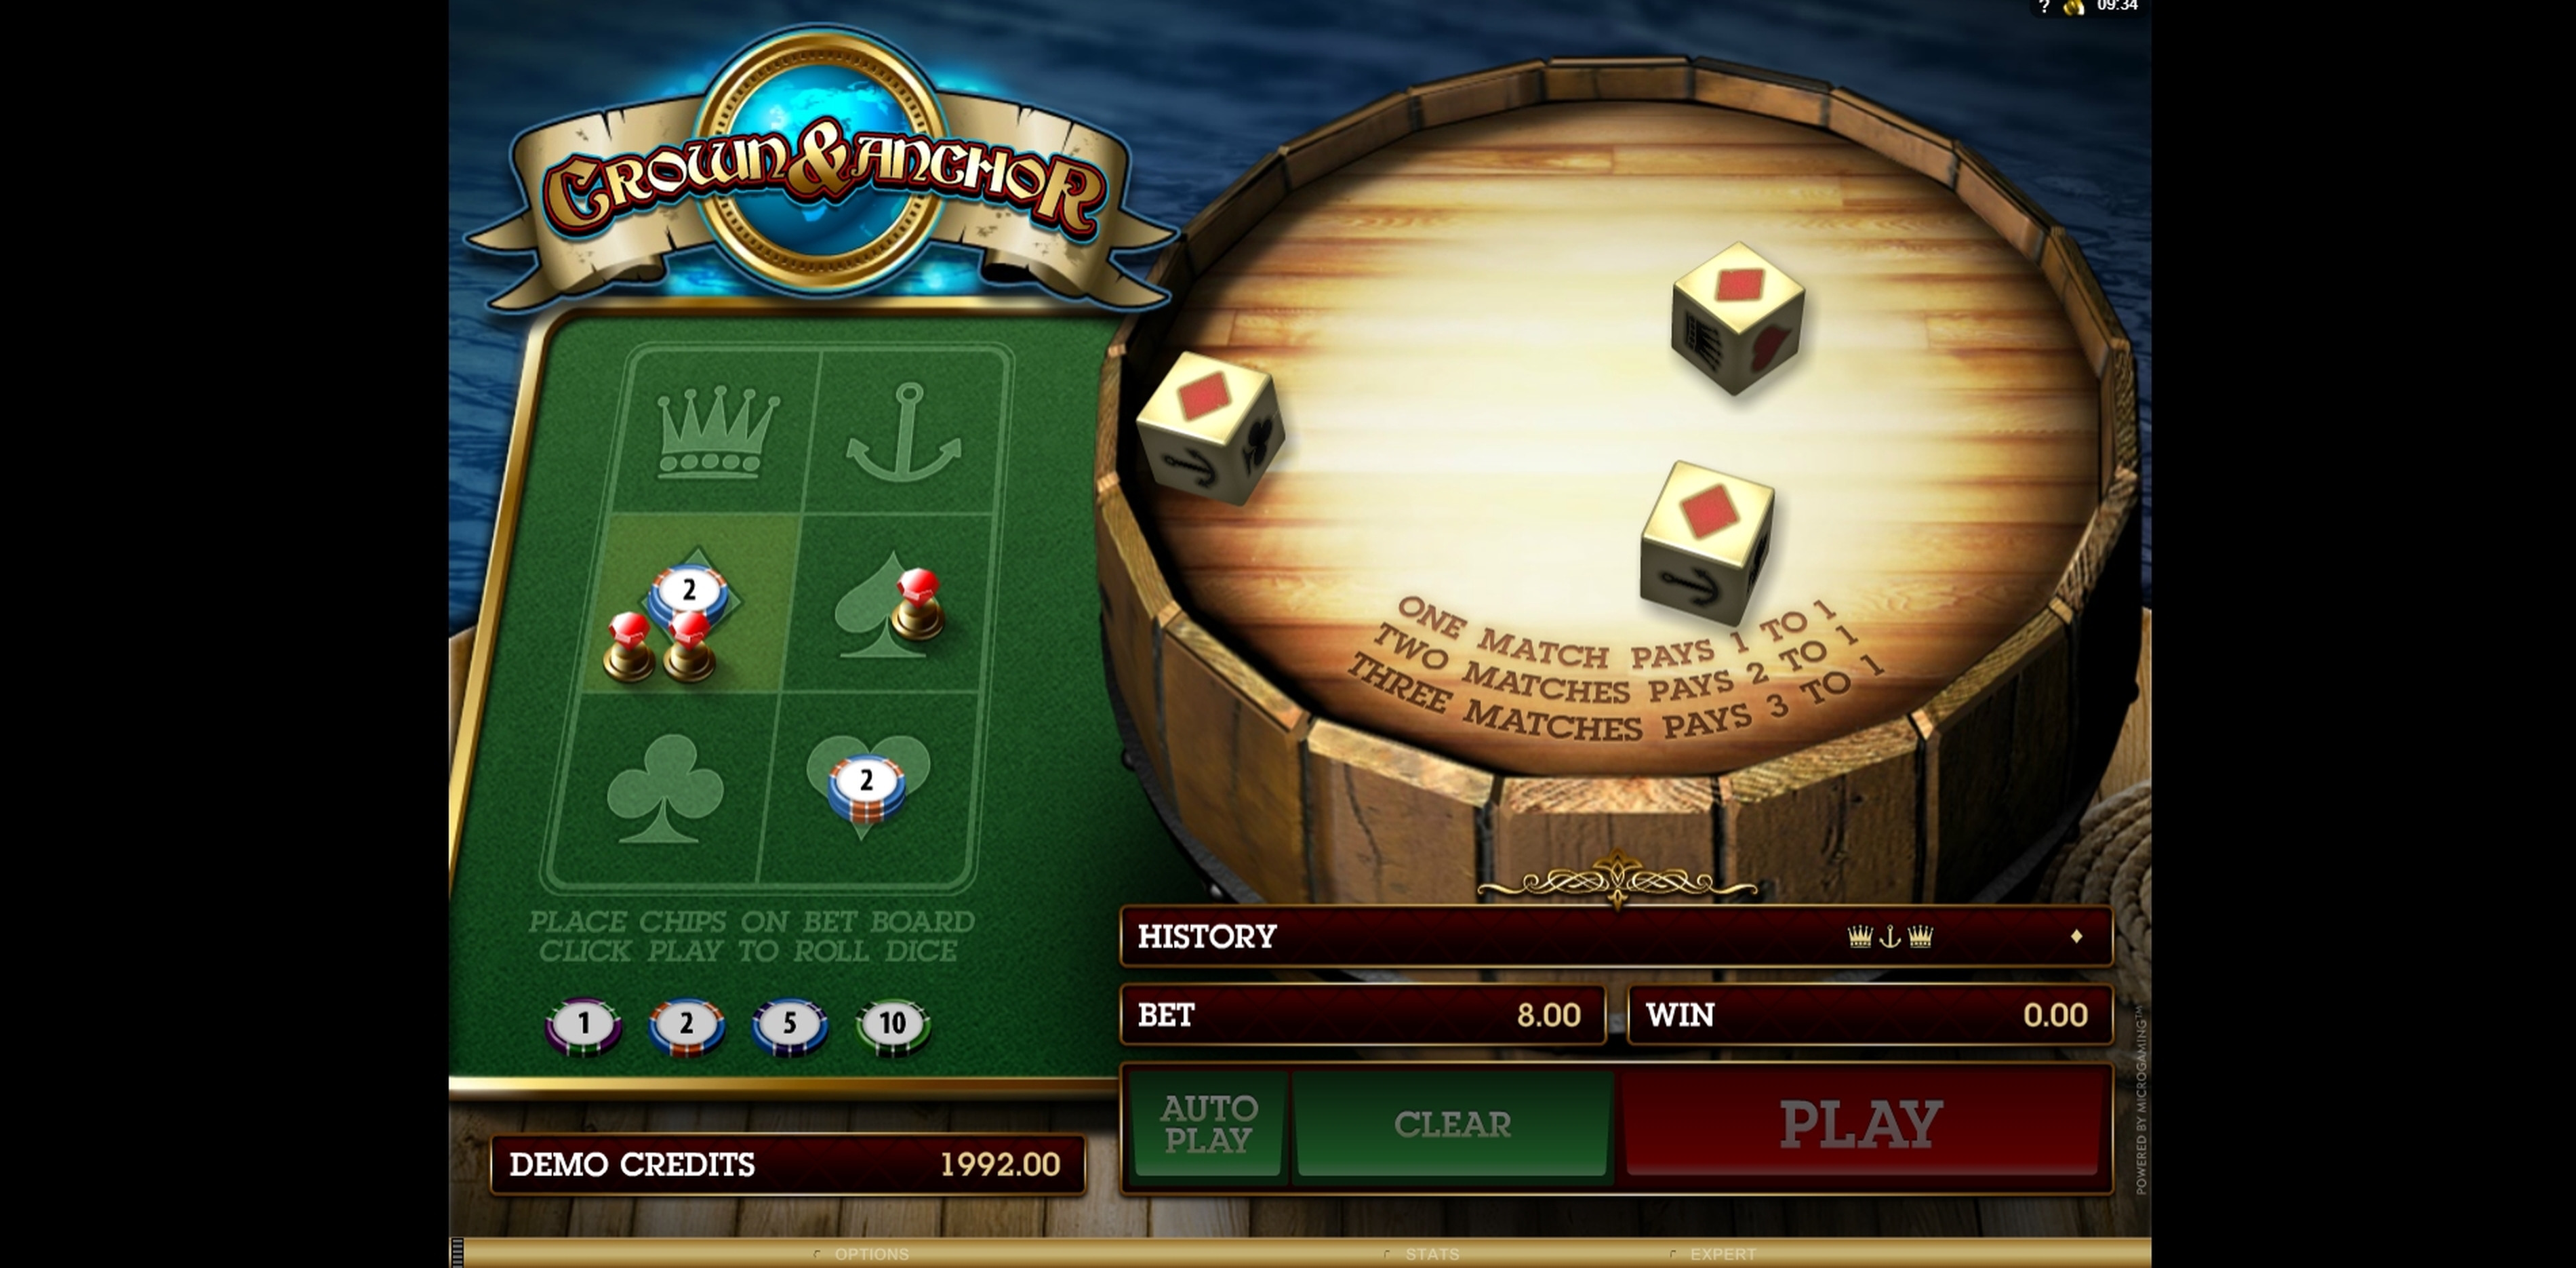 Win Money in Crown and Anchor Free Slot Game by Microgaming